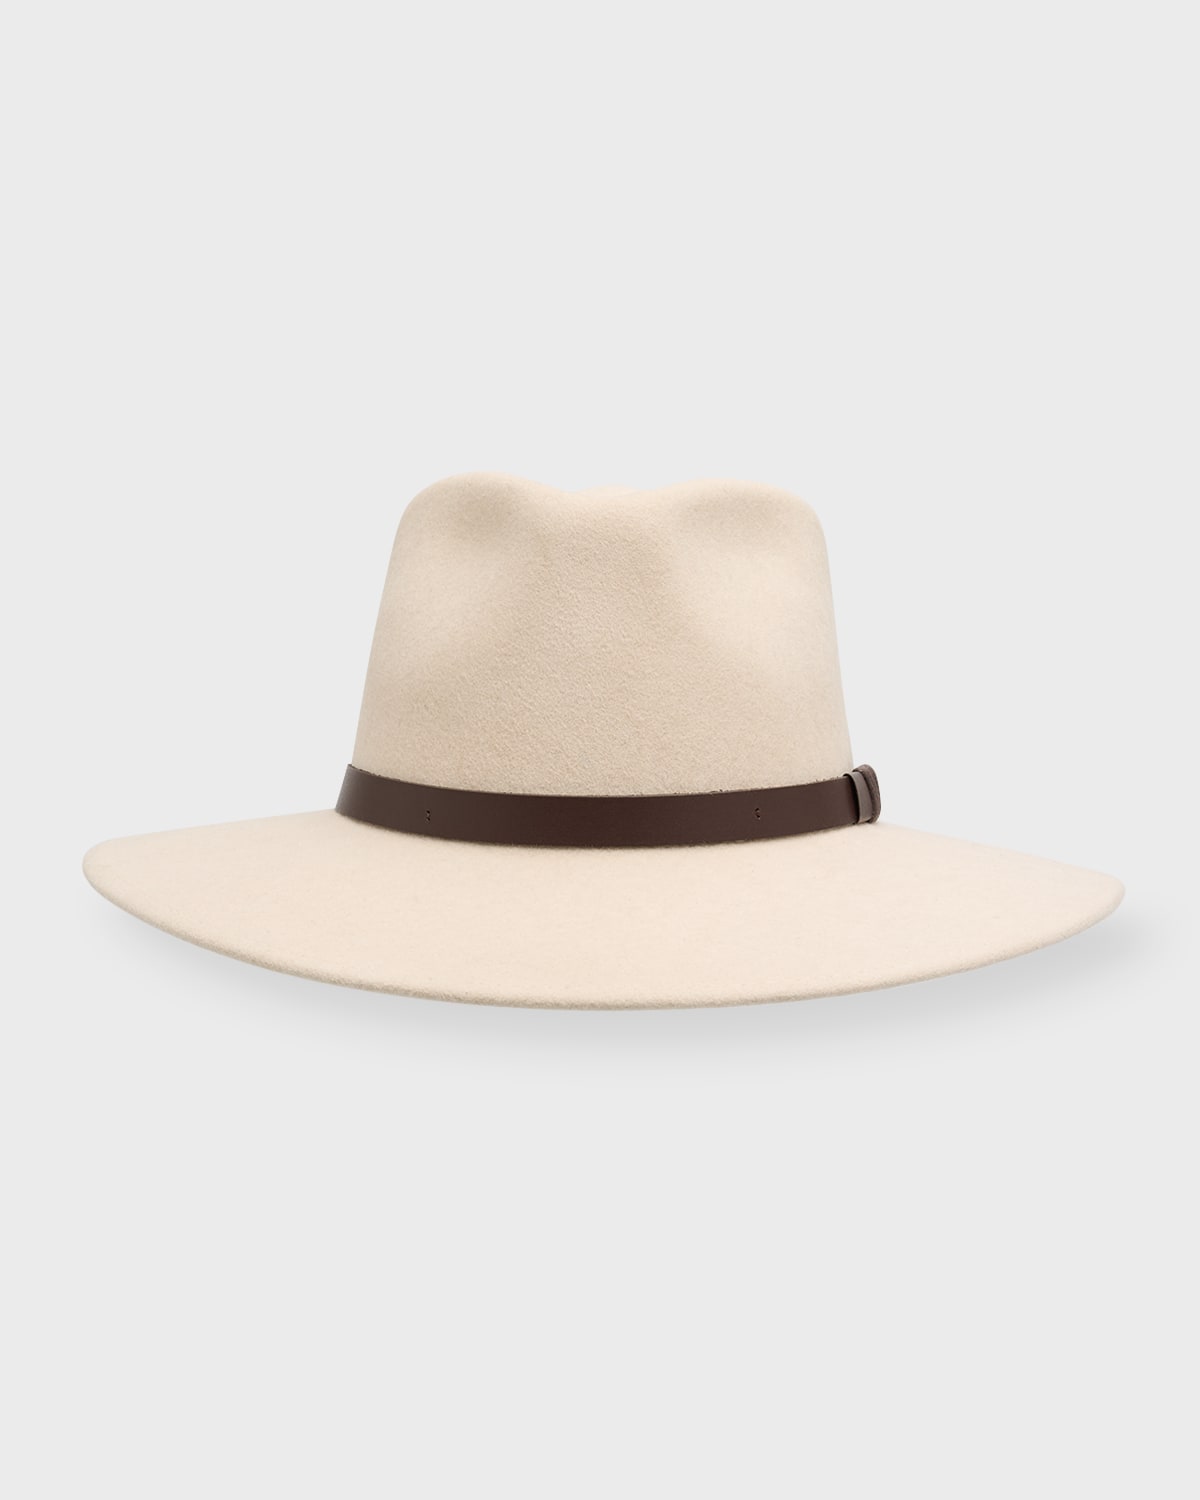 Dundee Felt Cowboy Hat With Riveted Band